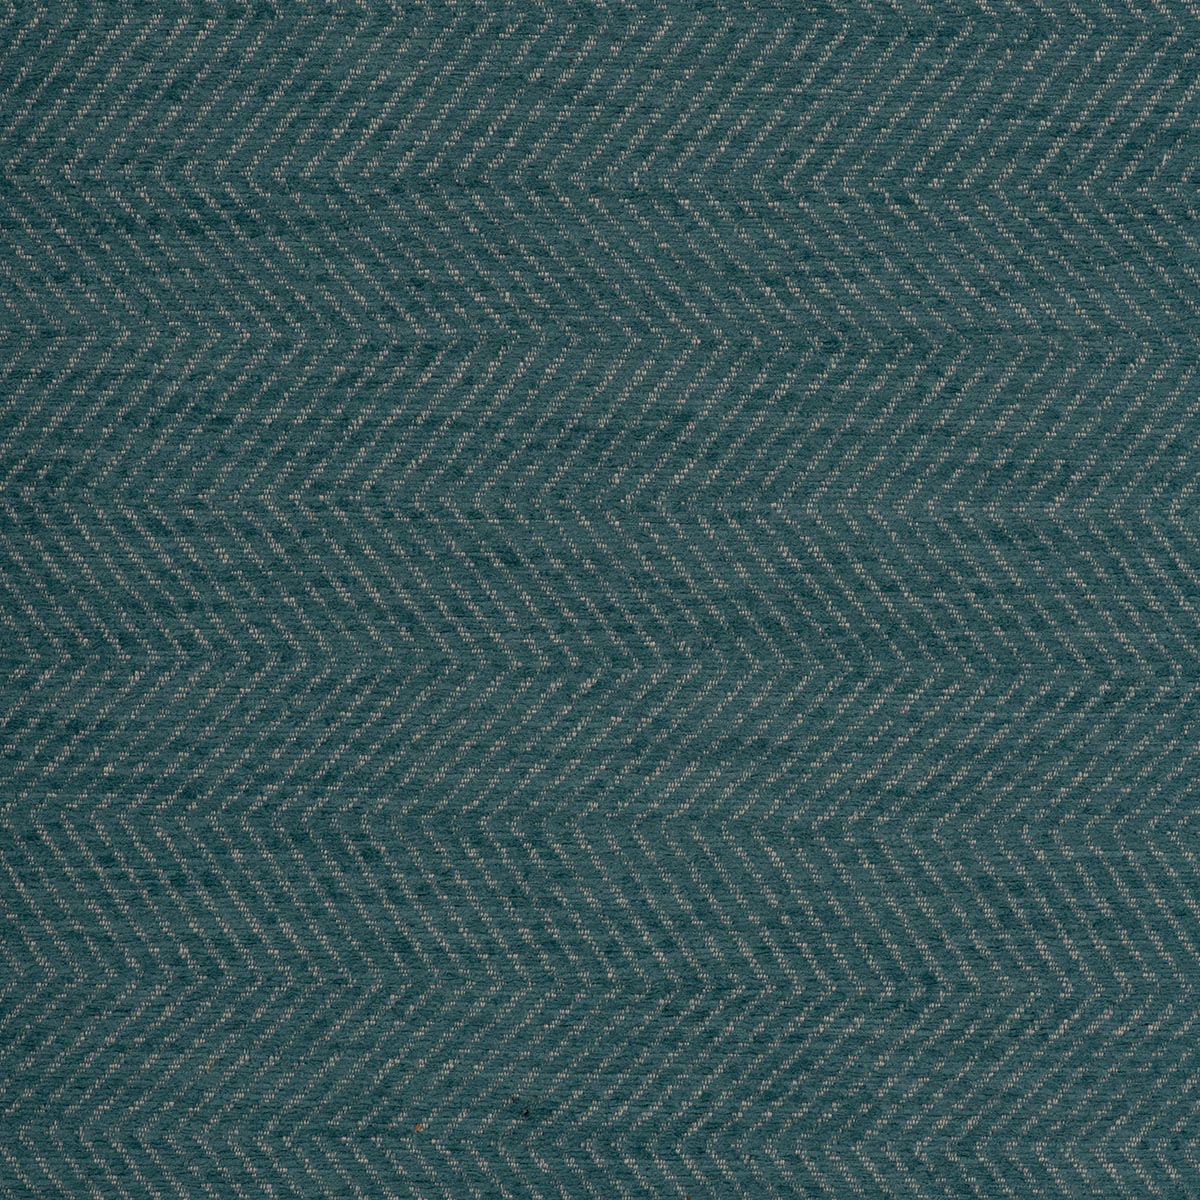 Purchase Mag Fabric Item 10552 Insideout Kenzie Ocean Fabric